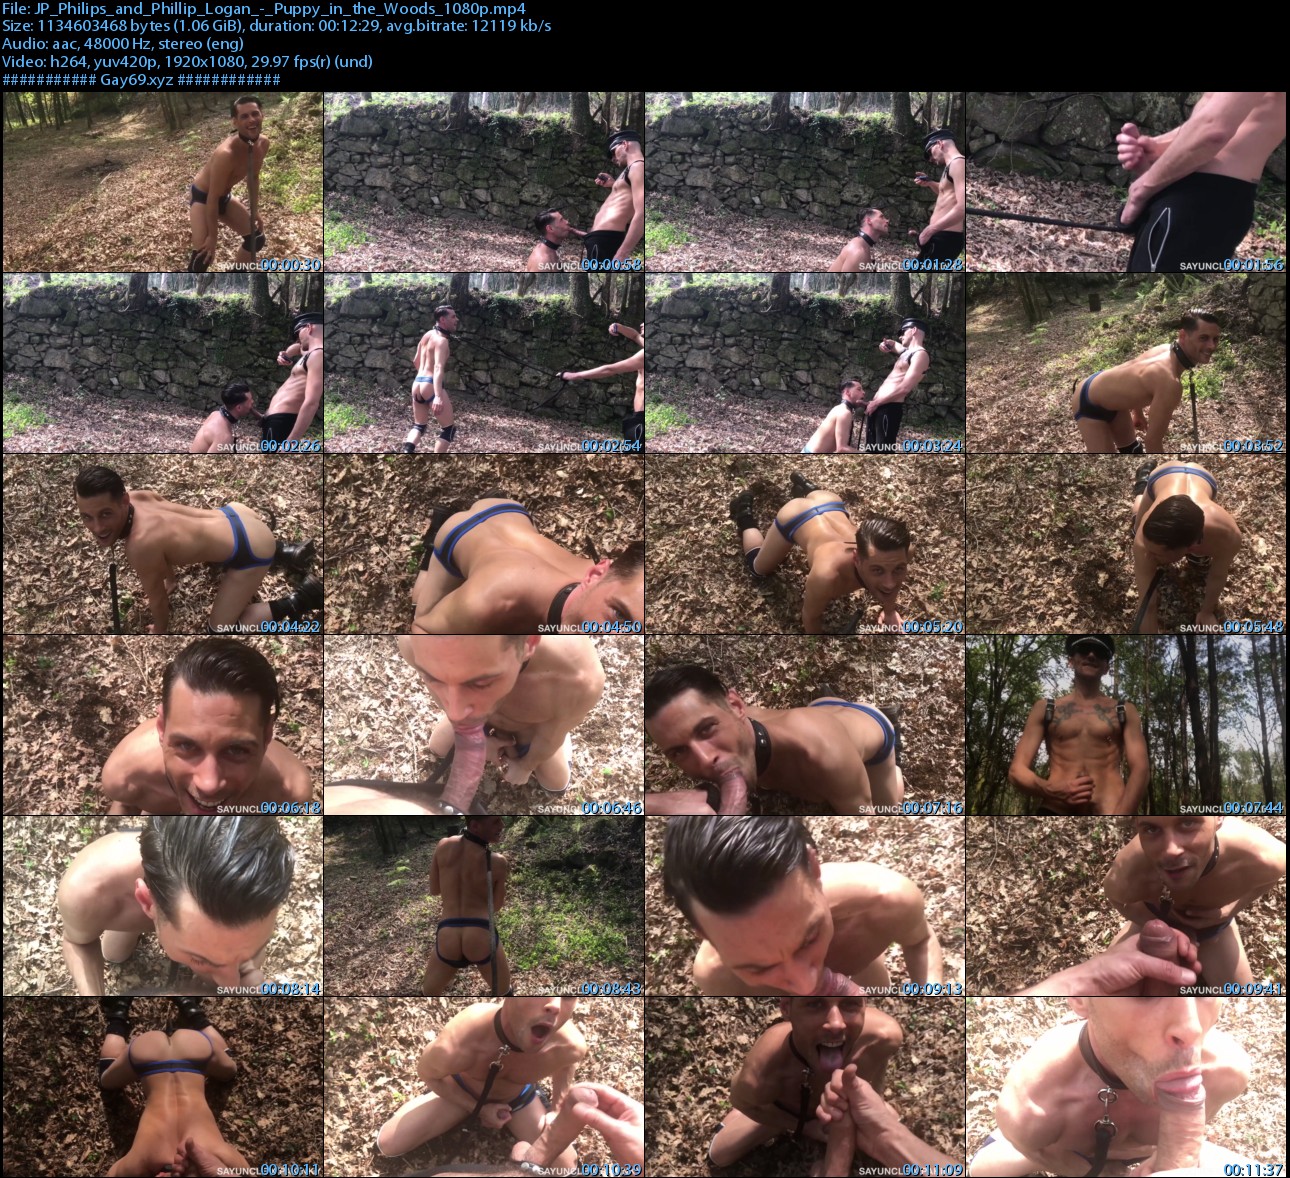 JP_Philips_and_Phillip_Logan_-_Puppy_in_the_Woods_1080p_s.jpg